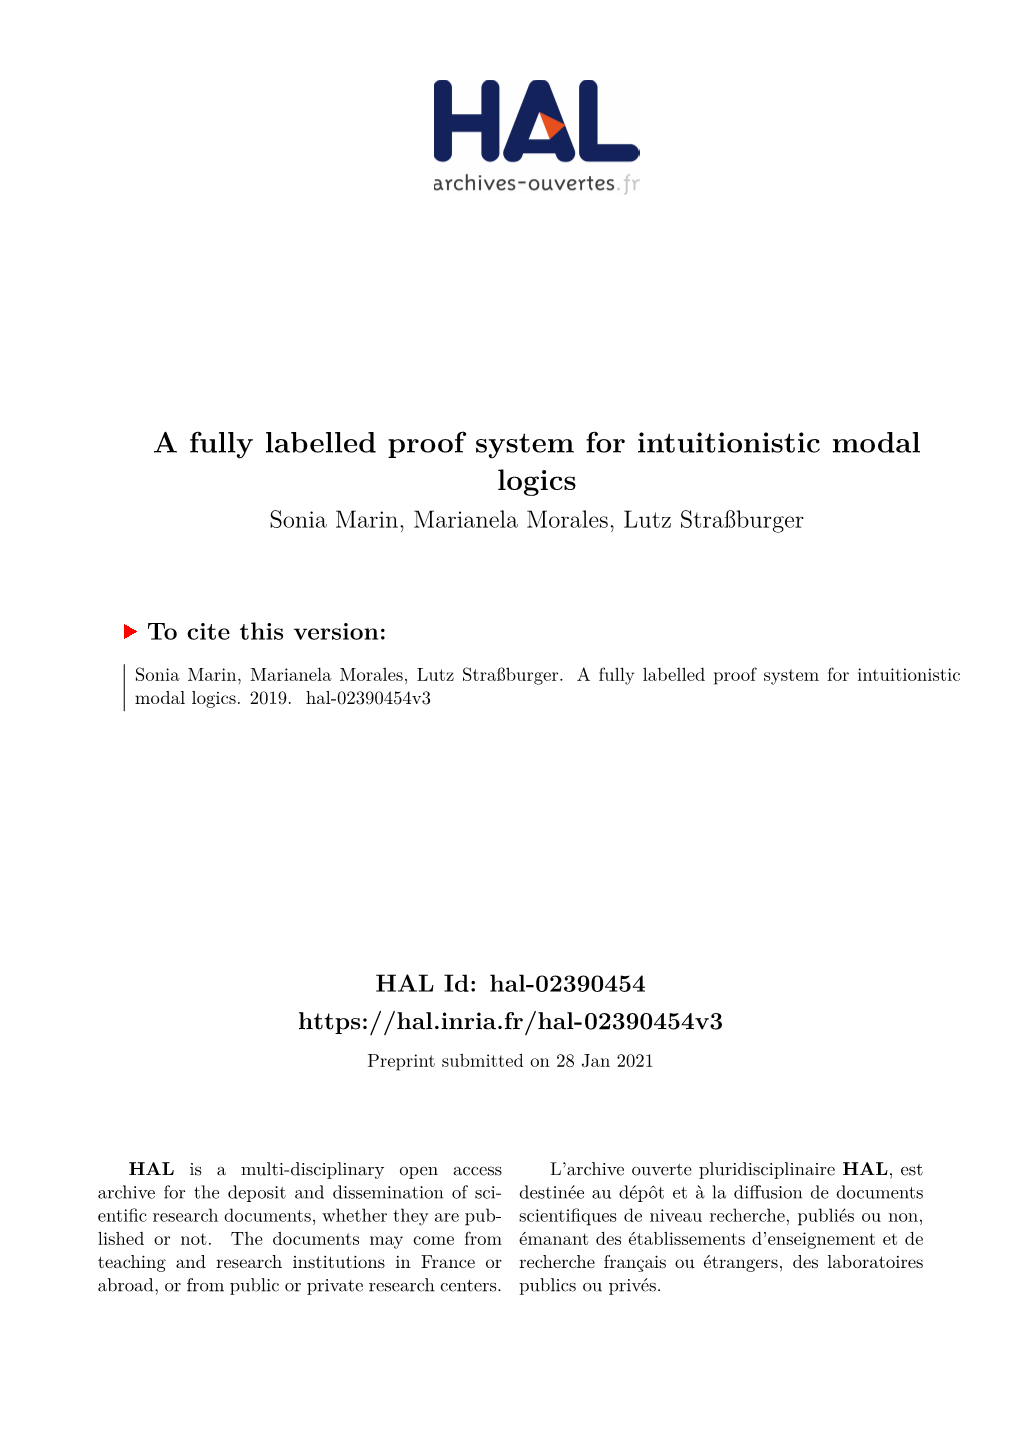 A Fully Labelled Proof System for Intuitionistic Modal Logics Sonia Marin, Marianela Morales, Lutz Straßburger